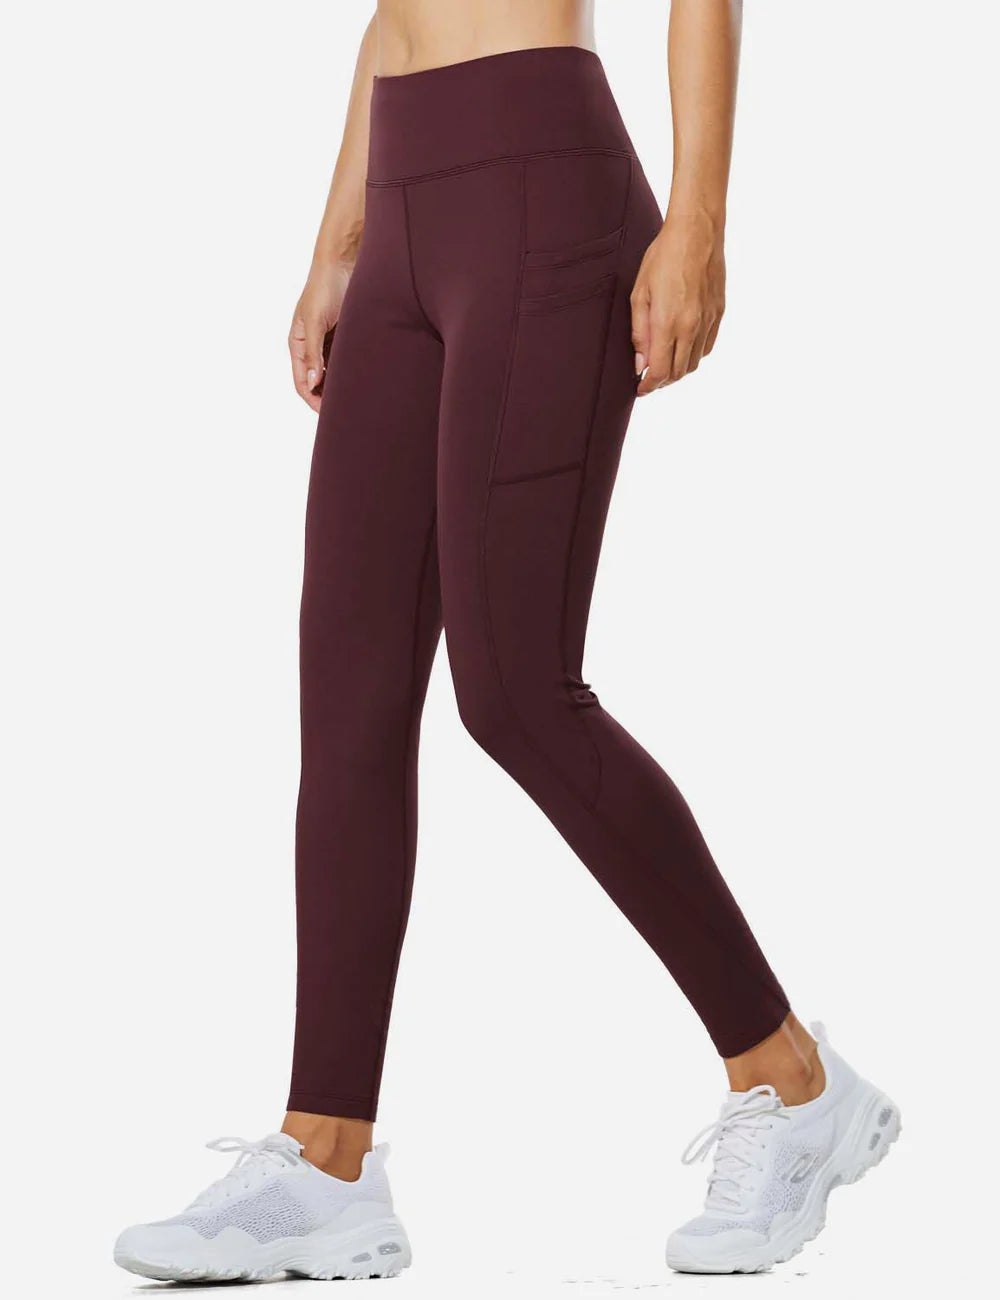 The Dos and Don'ts of Wearing Work Leggings in the Office – Baleaf